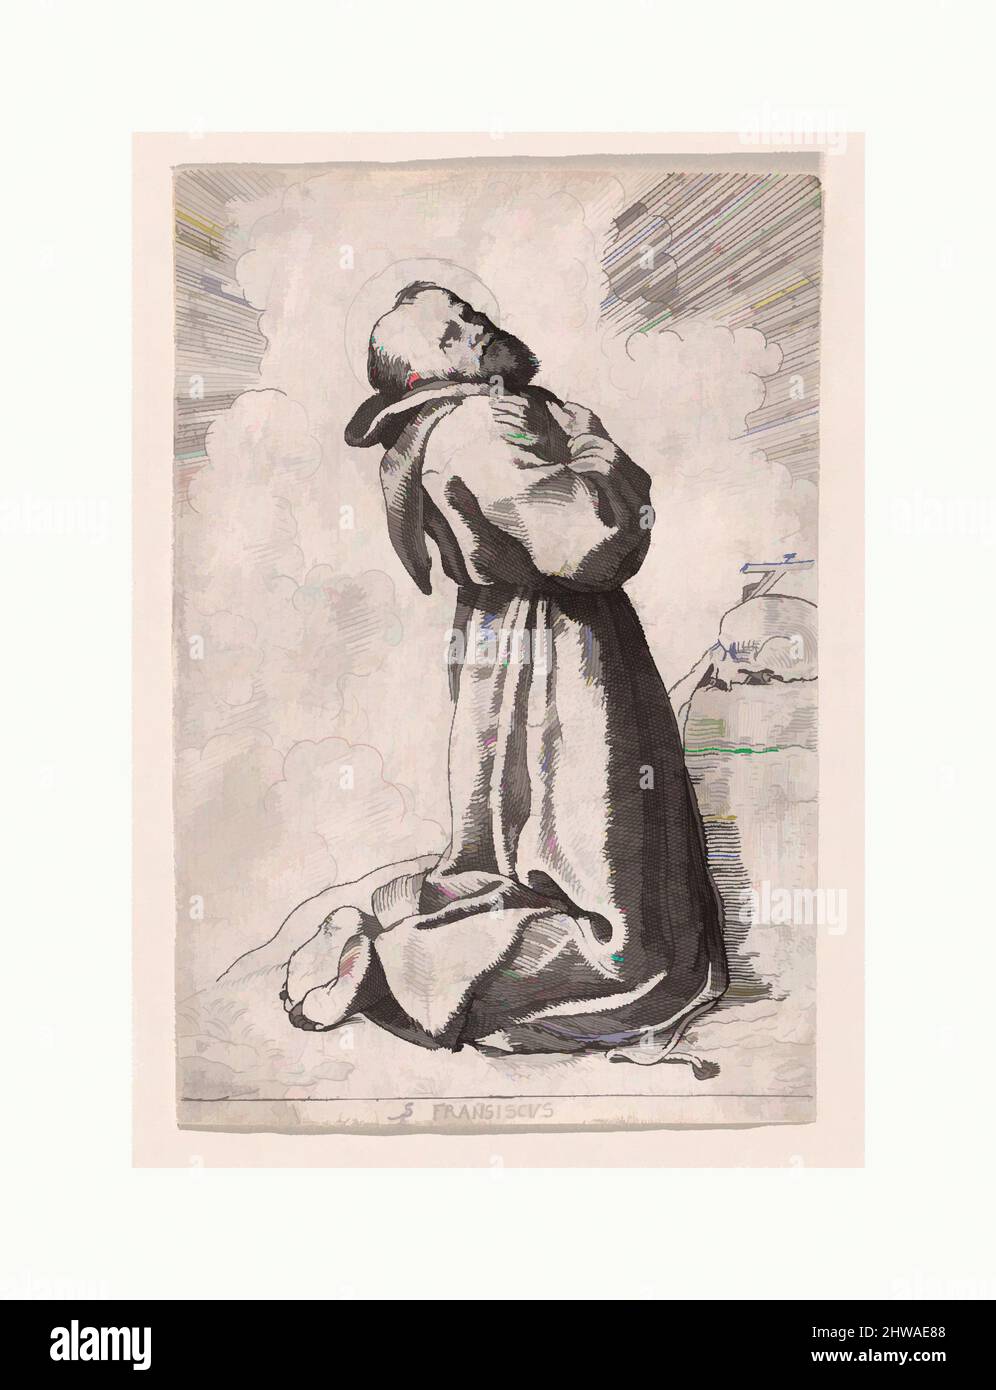 Art inspired by Drawings and Prints, Print, St. Francis, Artist, Publisher, Willem Pietersz. Buytewech, Claes Jansz. Visscher, Dutch, 1591–1624, Classic works modernized by Artotop with a splash of modernity. Shapes, color and value, eye-catching visual impact on art. Emotions through freedom of artworks in a contemporary way. A timeless message pursuing a wildly creative new direction. Artists turning to the digital medium and creating the Artotop NFT Stock Photo